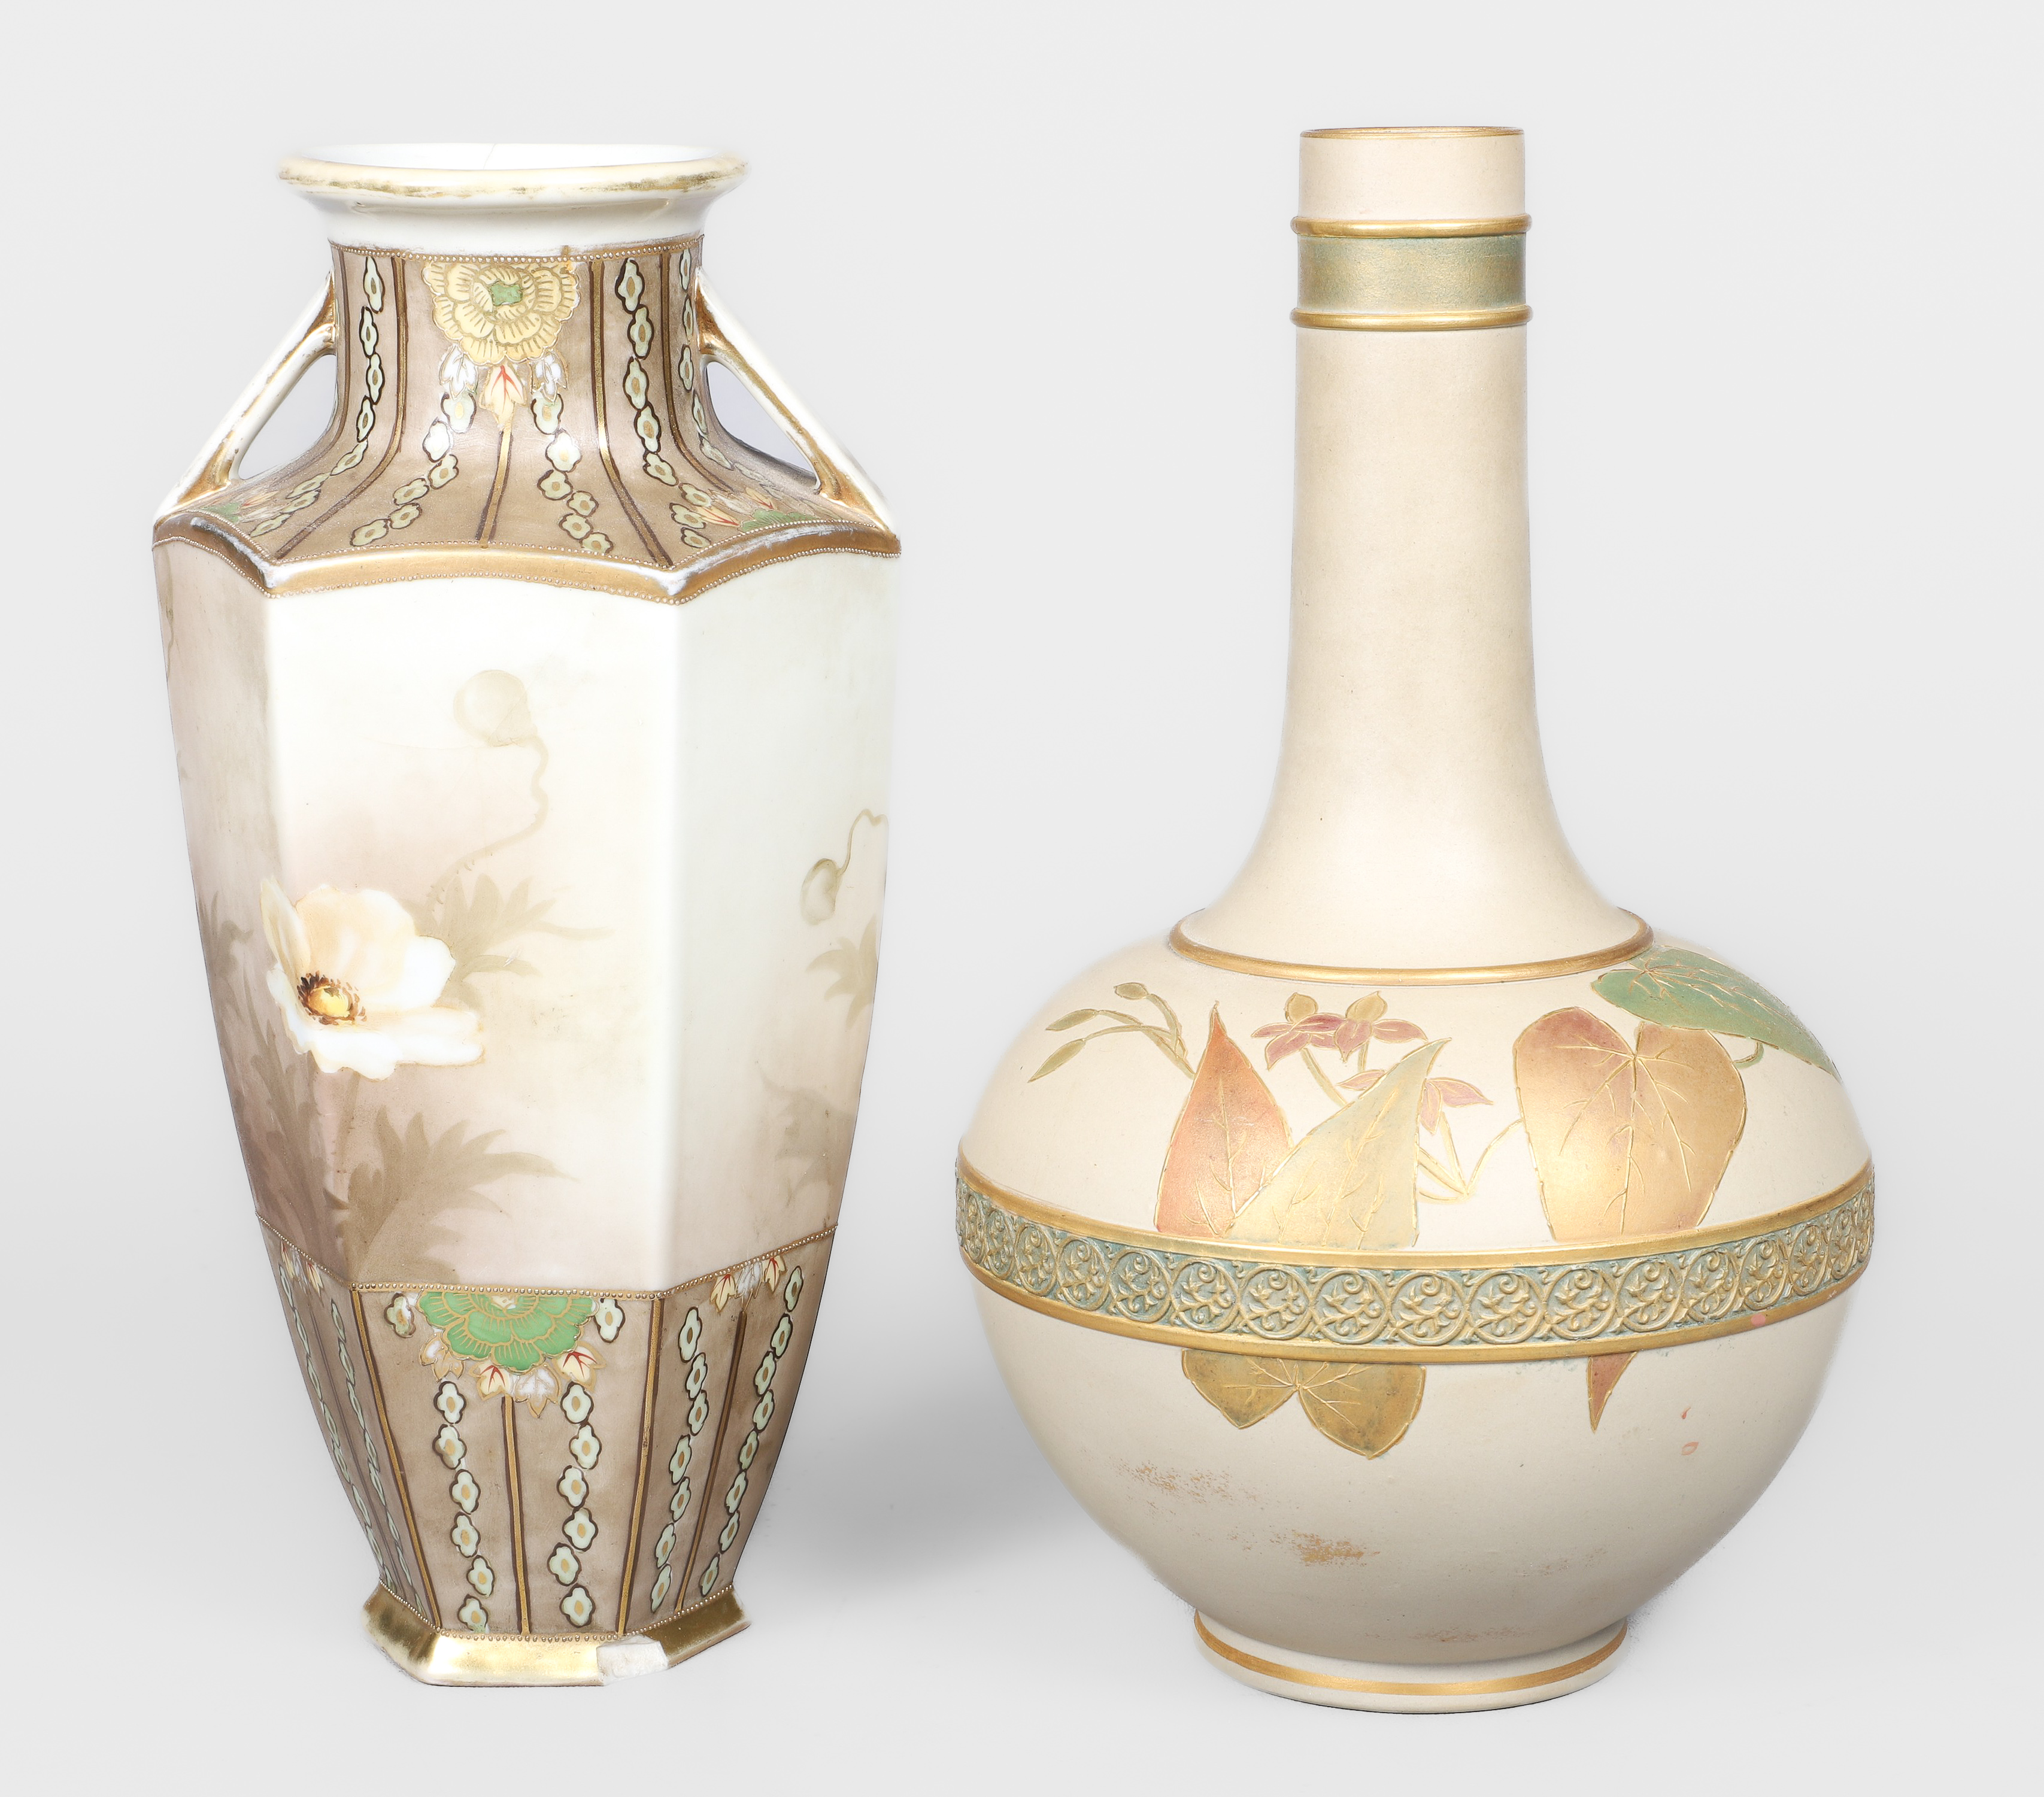  2 Severn ware and Nippon vases 2e193f